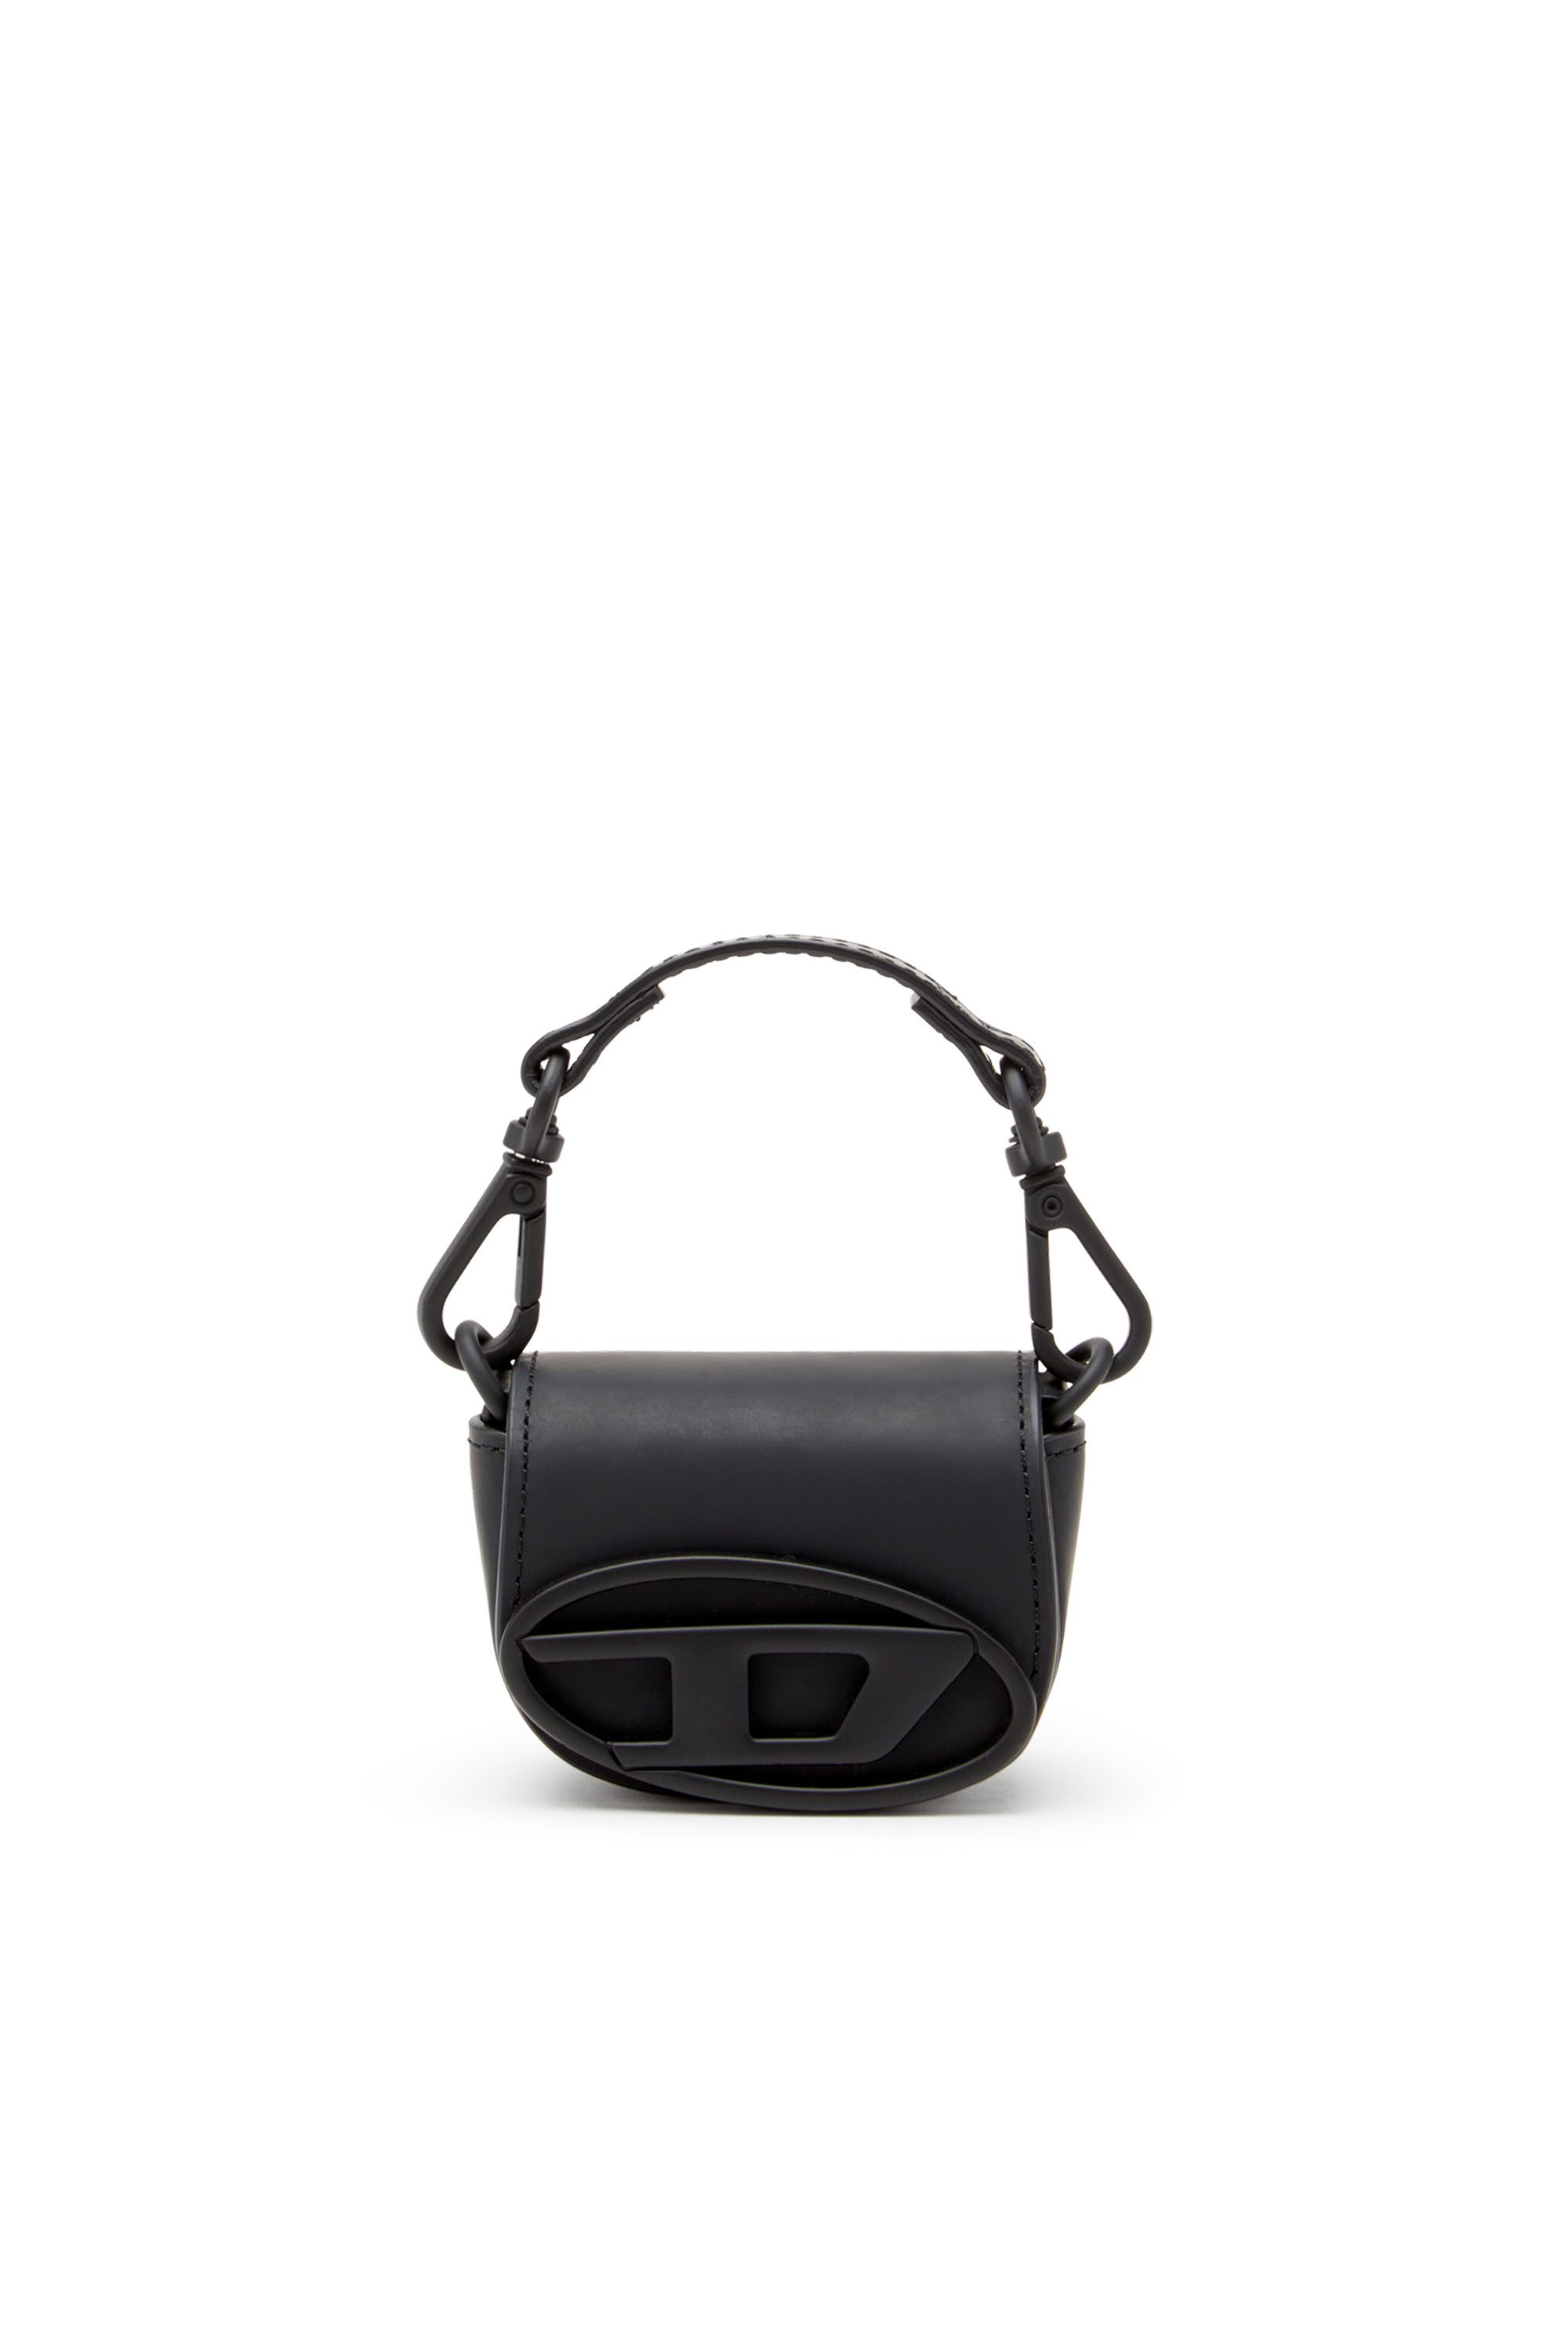 Diesel - 1DR XXS CHAIN, Female Iconic micro bag charm in matte leather in ブラック - Image 6